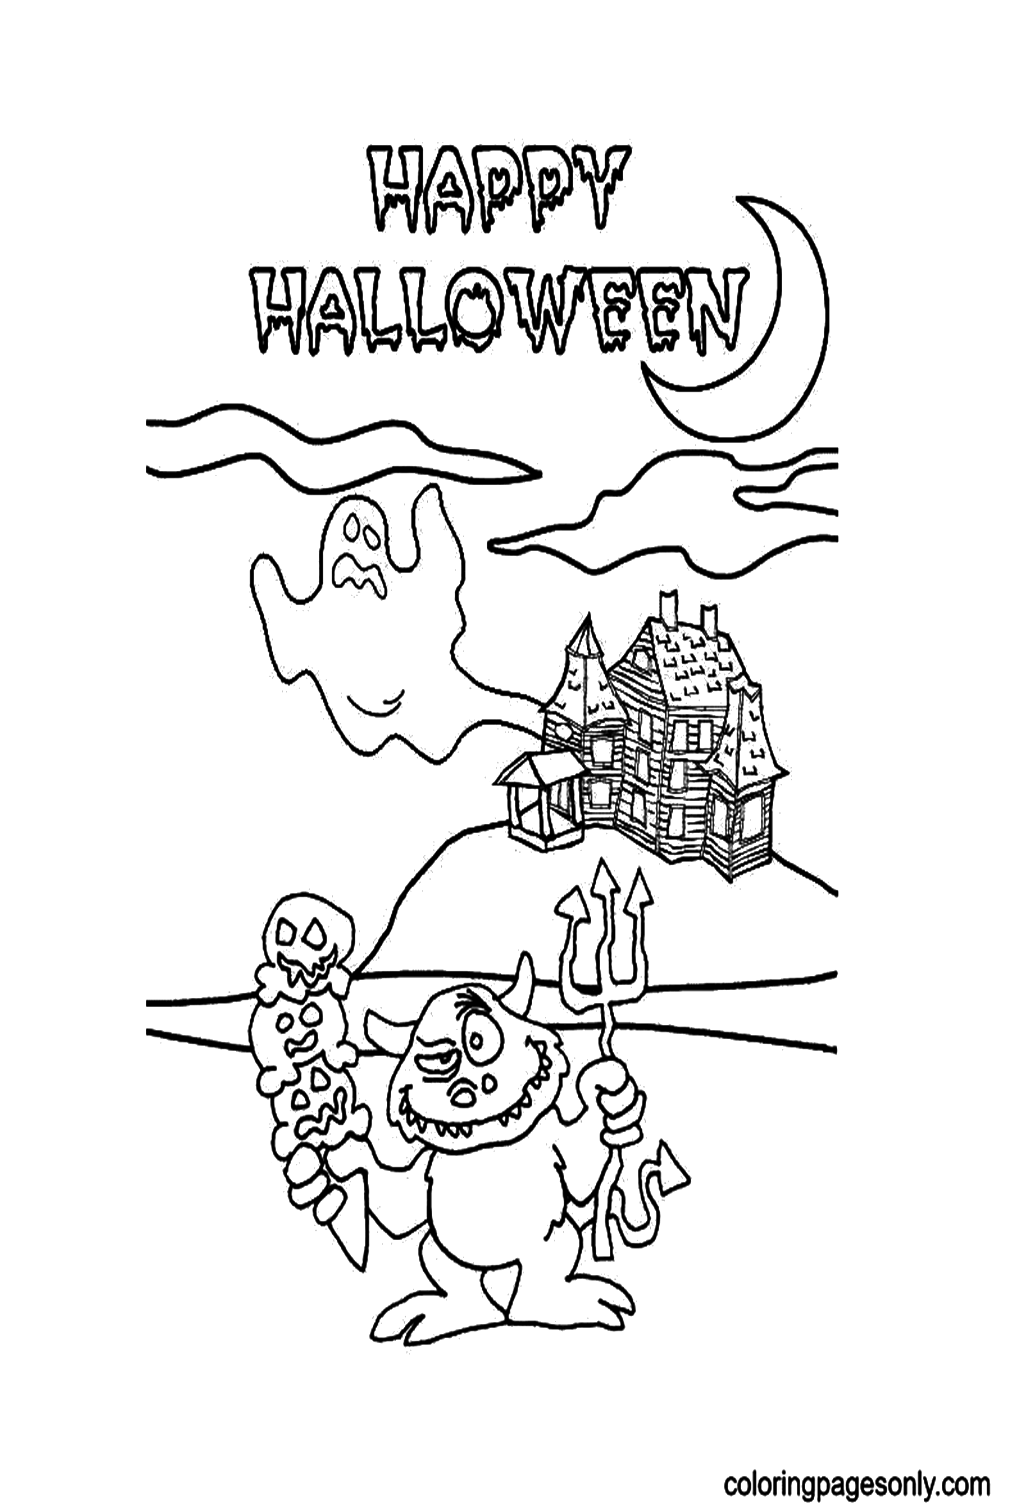 Spooky Halloween Skull Coloring Pages - Halloween Monsters Coloring ...